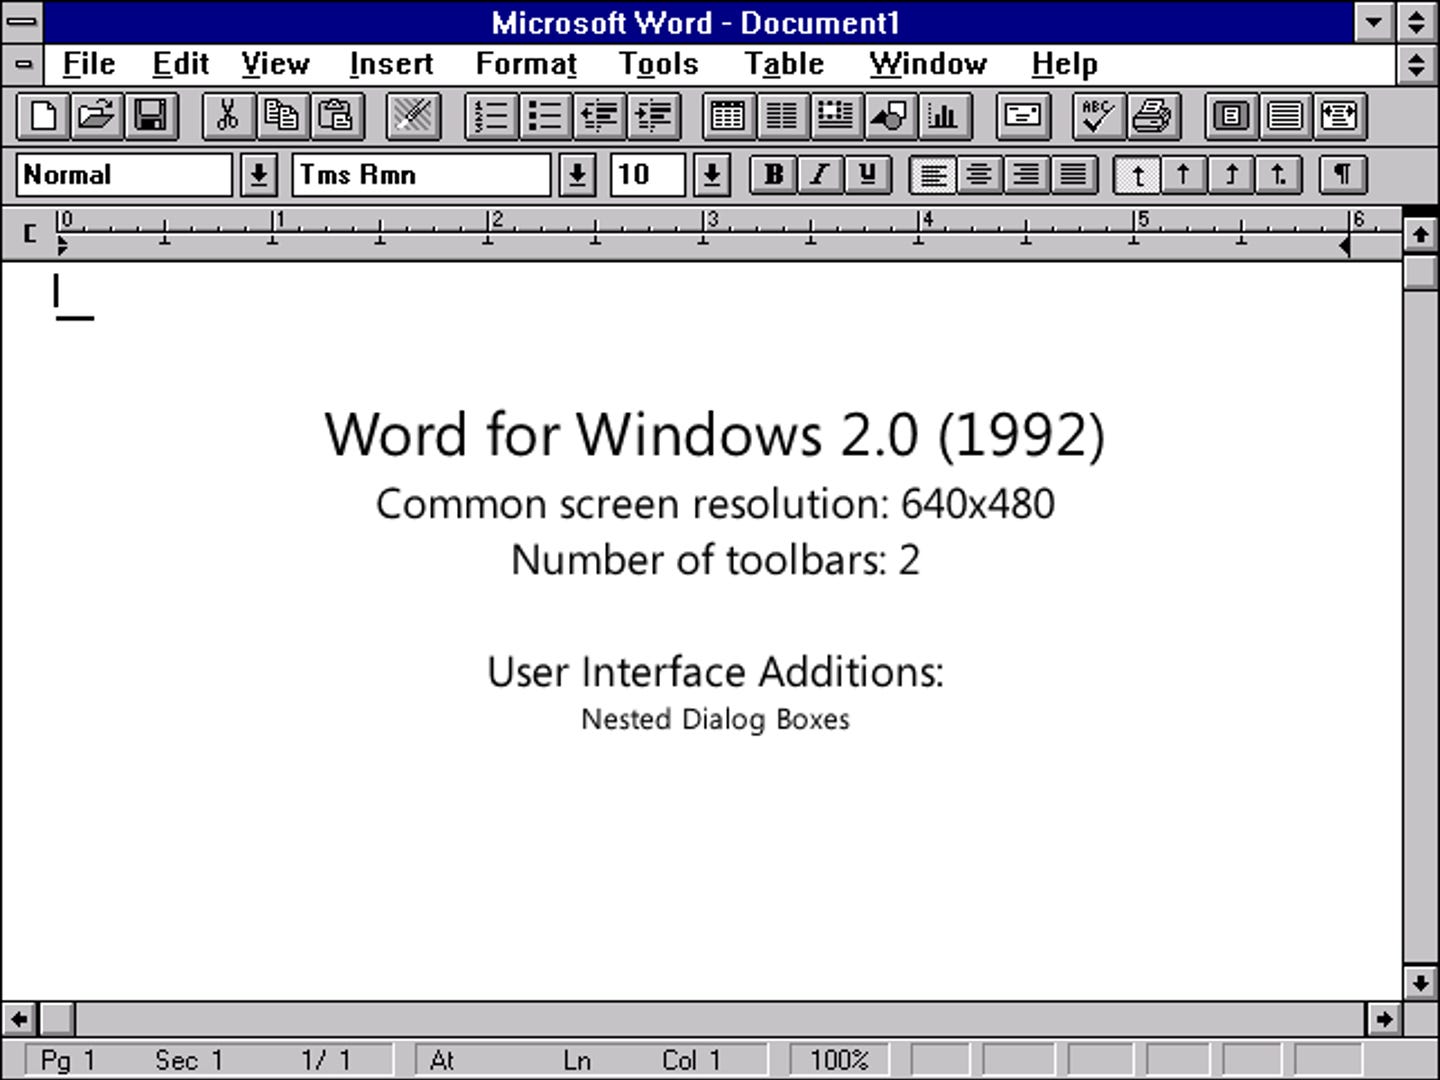 Word for Windows 2.0 (1992) Common screen resolution: 640x480 Number of toolbars: 2 User Interface Additions: Nested Dialog Boxes